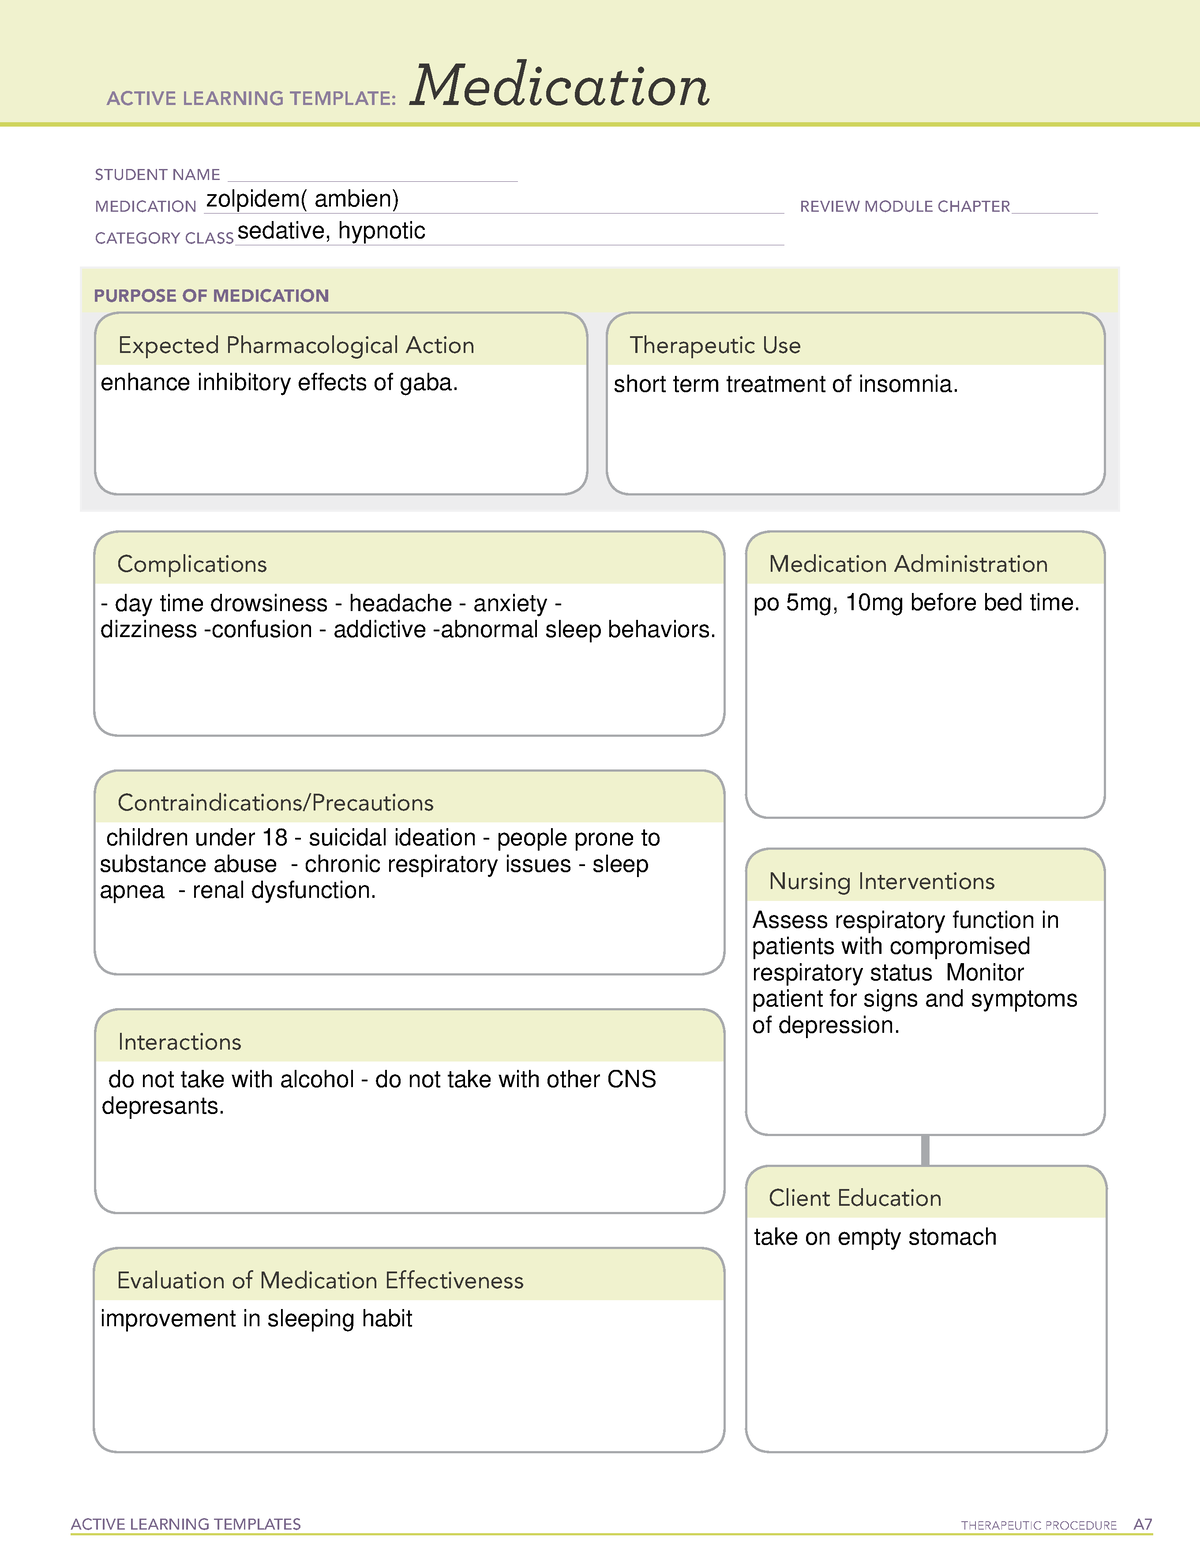 Zolpidem Medication Active Learning templates ACTIVE LEARNING